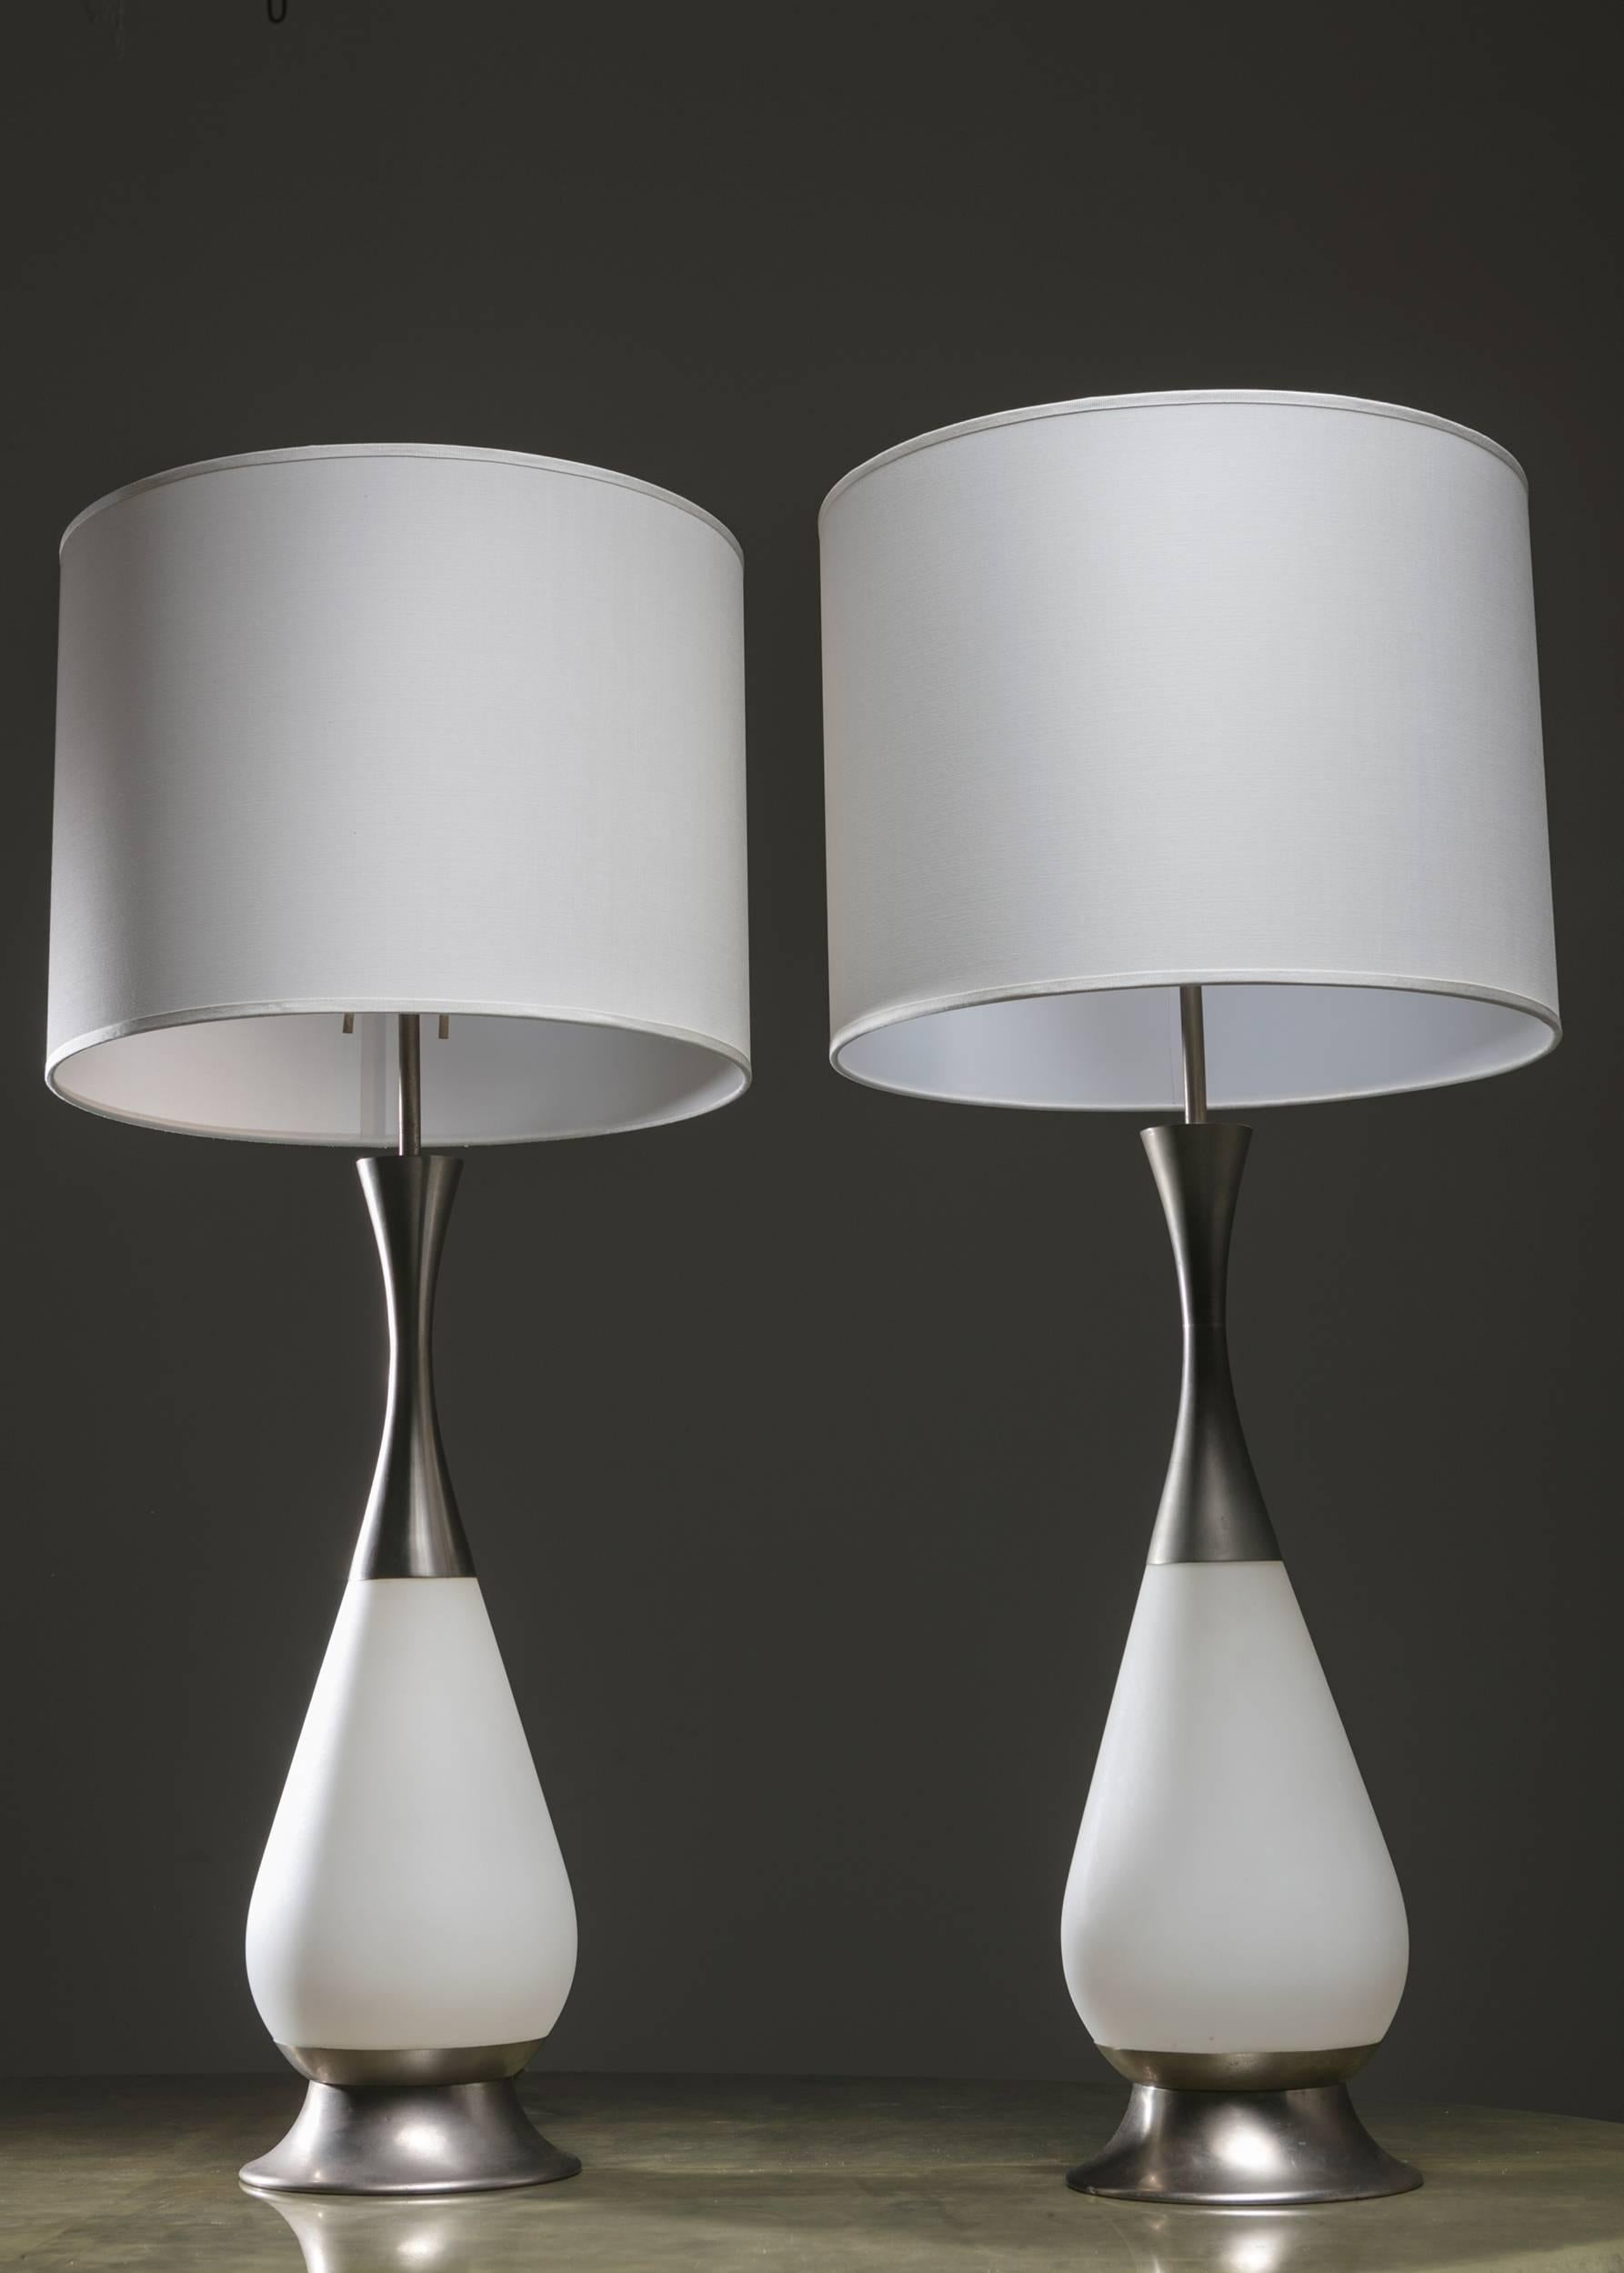 Marvellous Set of Two Stilnovo Table Lamps, Italy, 1960s In Good Condition For Sale In Milan, IT